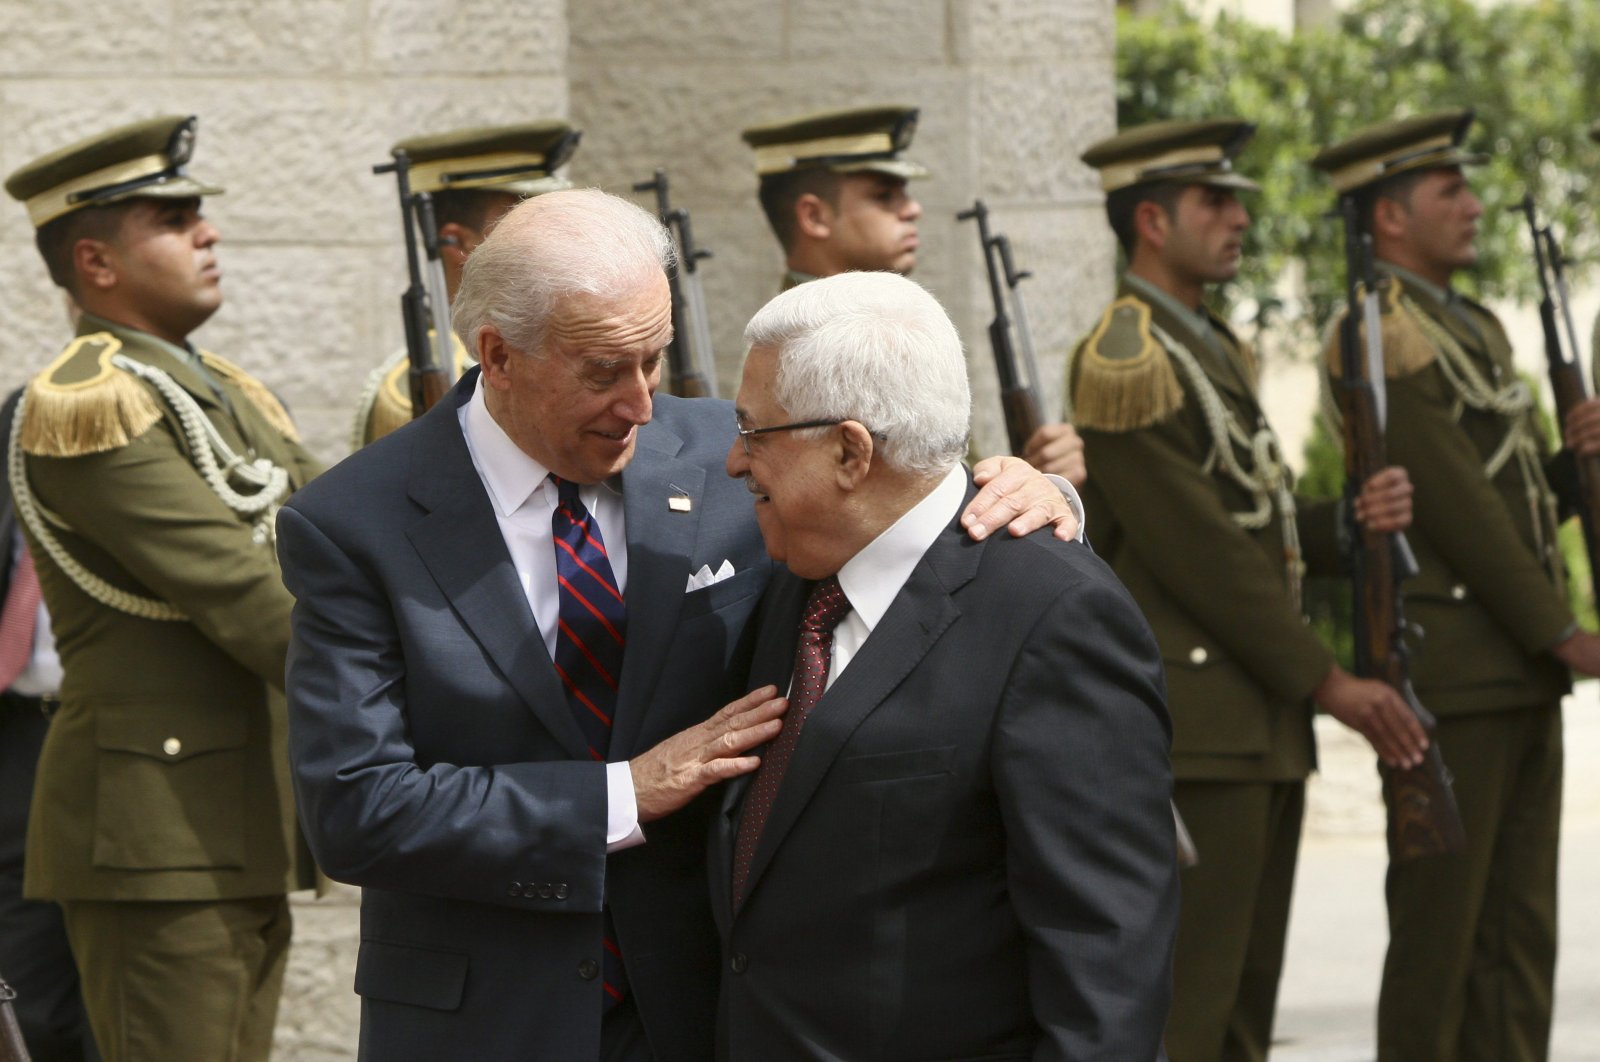 U.S. then-Vice President Joseph Biden (L) talks with Palestinian President Mahmoud Abbas ahead of their meeting in the West Bank city of Ramallah, Palestine, March 10, 2010. (AP Photo)